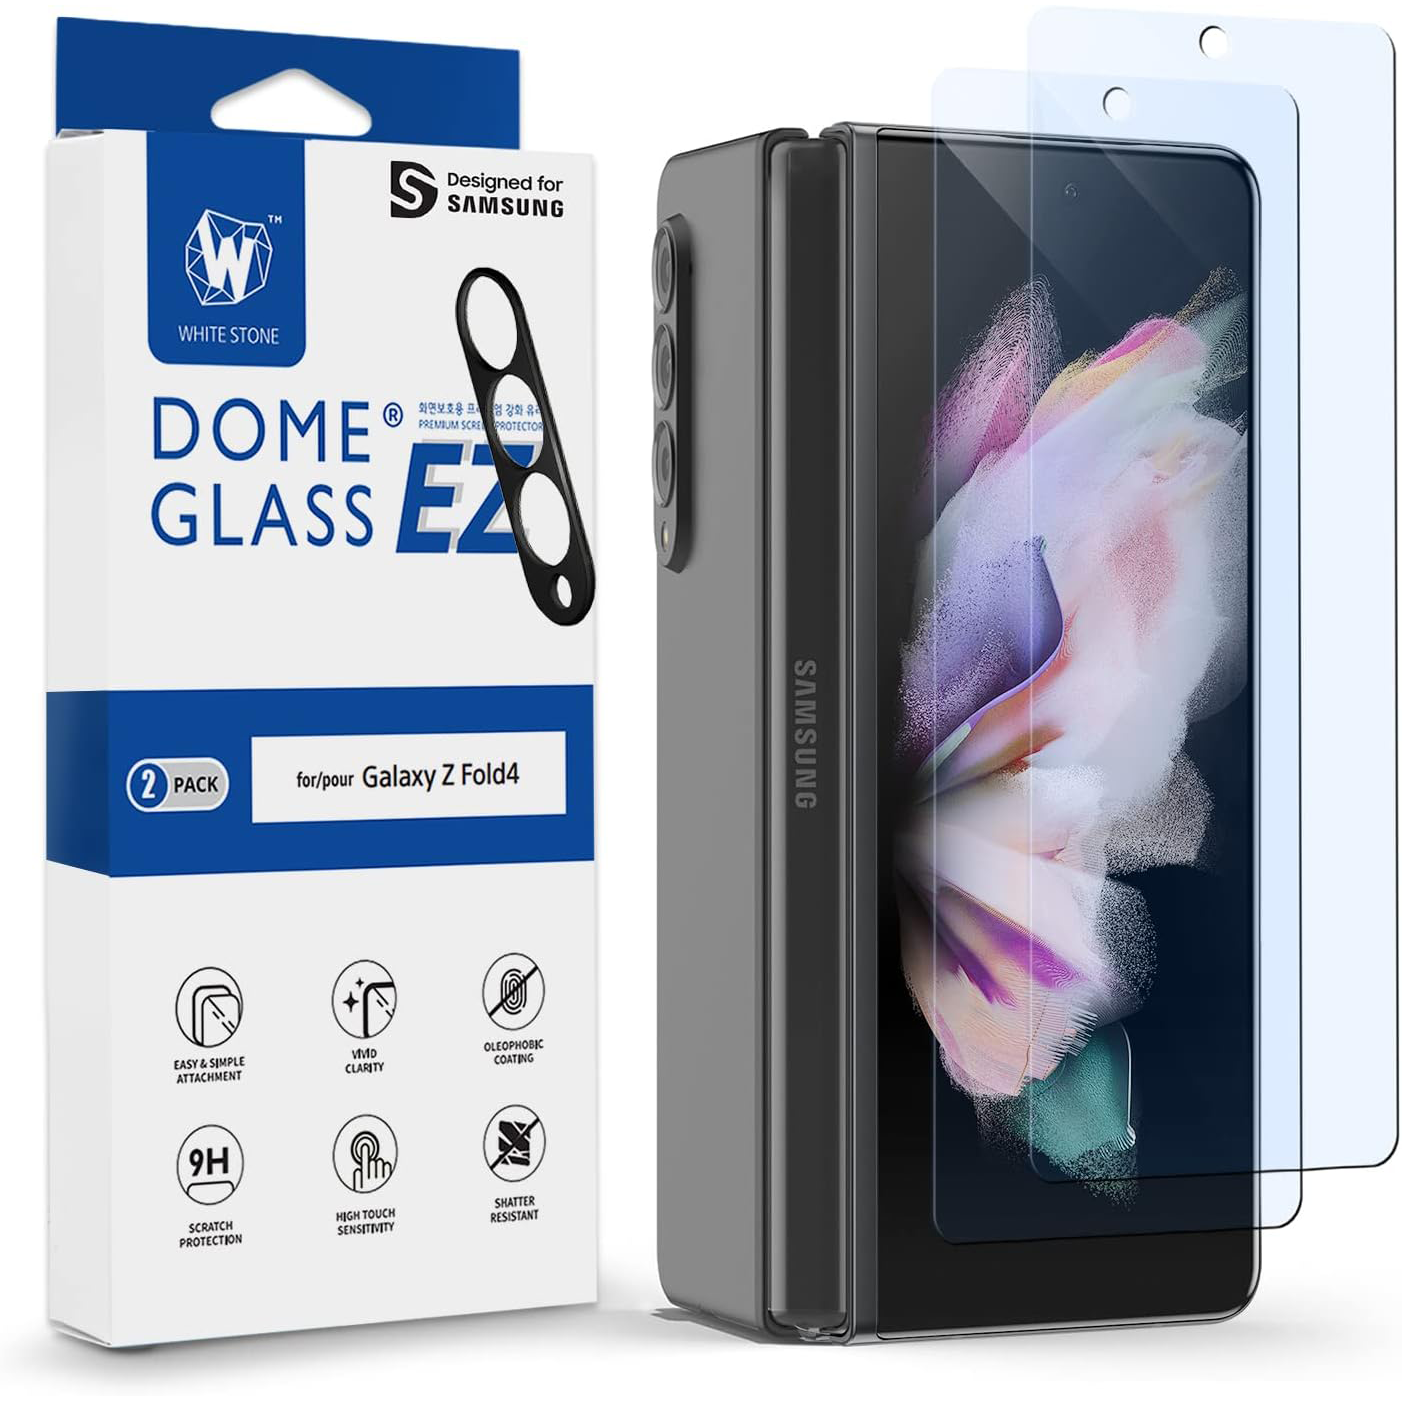 Whitestone Dome EZ Glass Z Fold 4, layered front view beside packaging